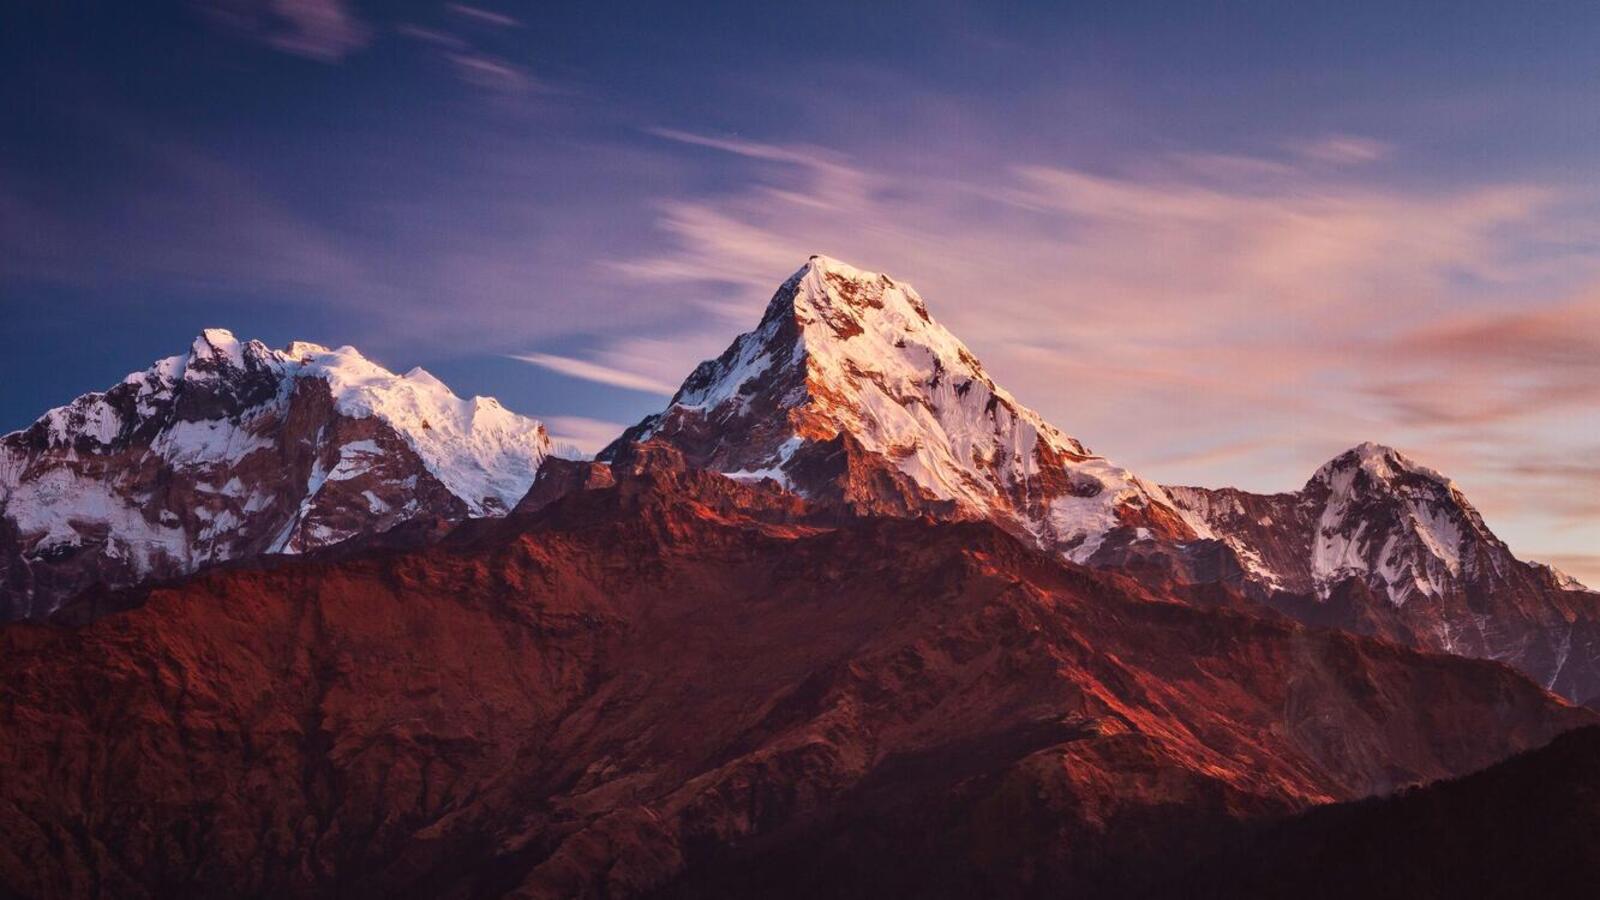 Wallpapers wallpaper nepal mountains landscapes on the desktop